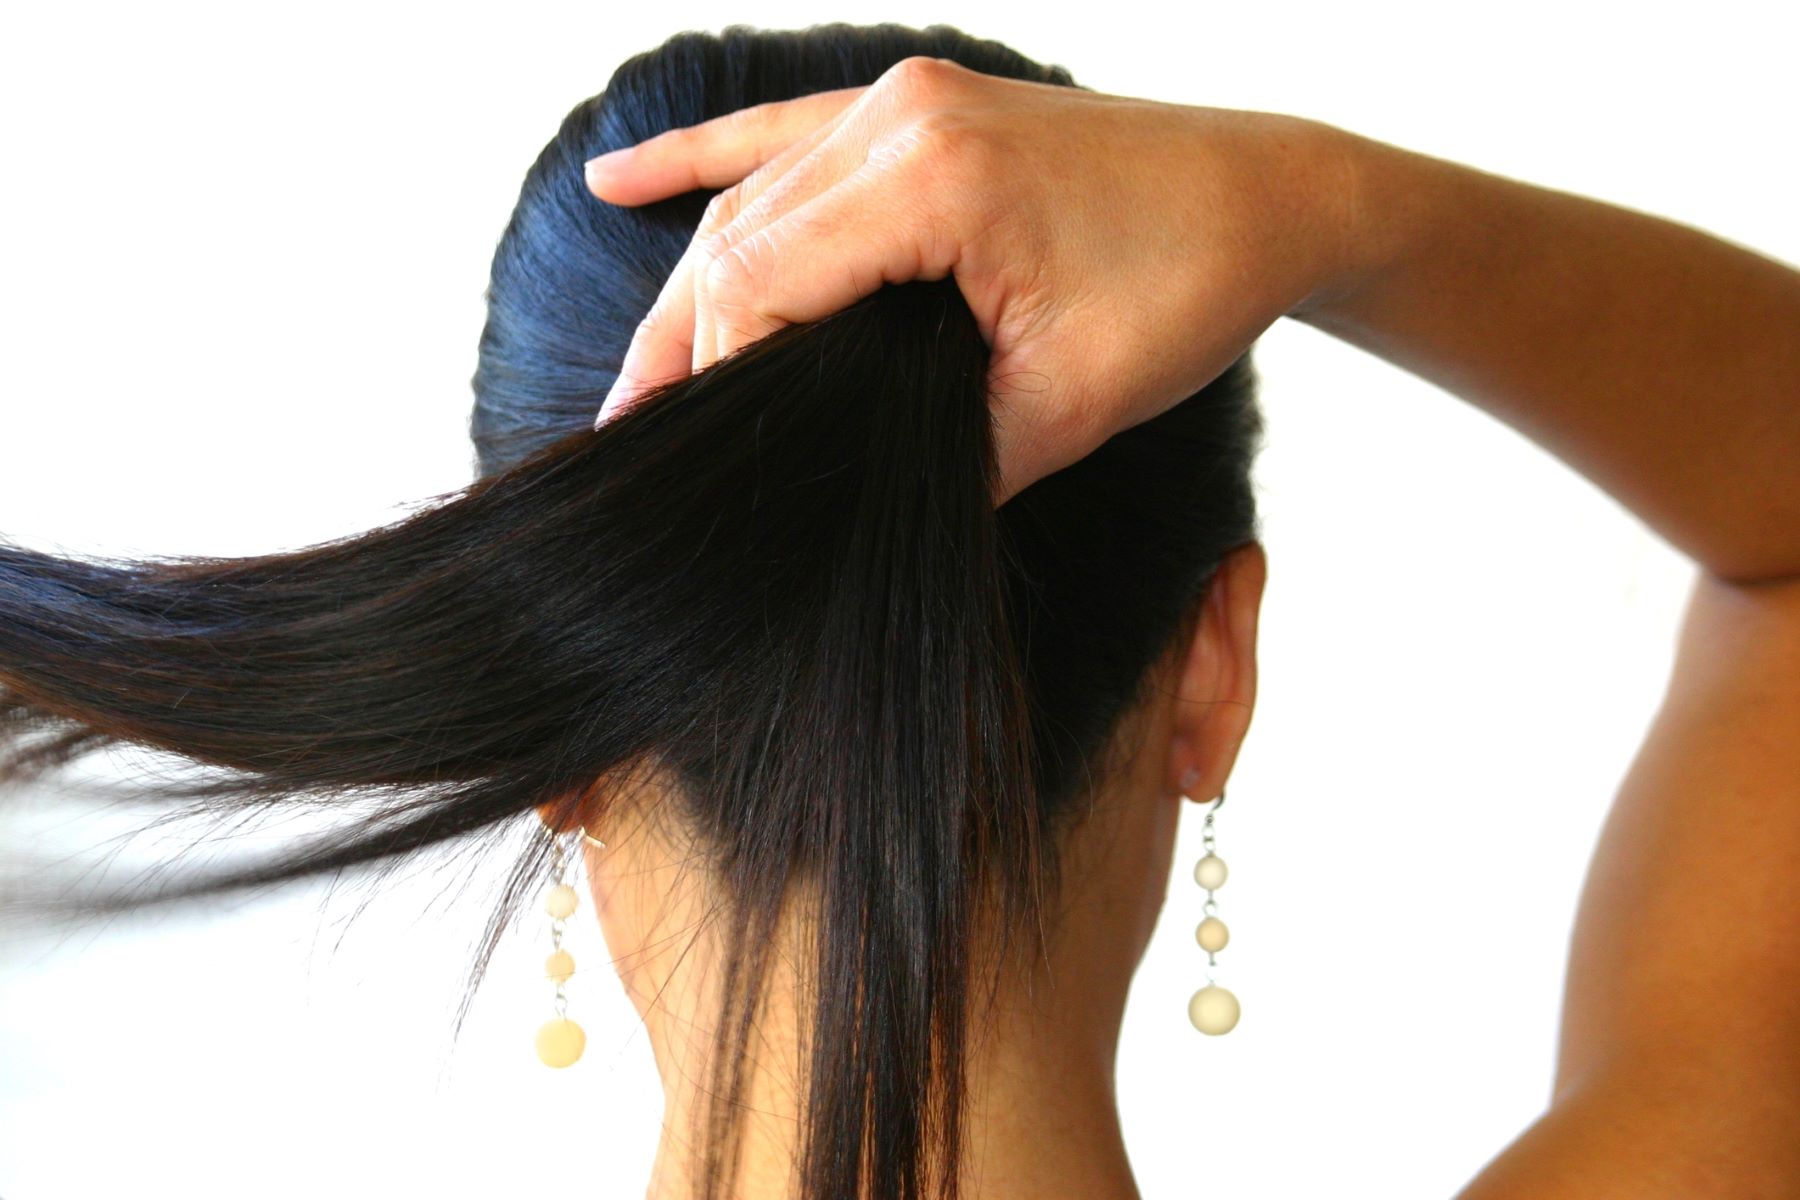 Hairstyles that can cause hair damage and hair loss